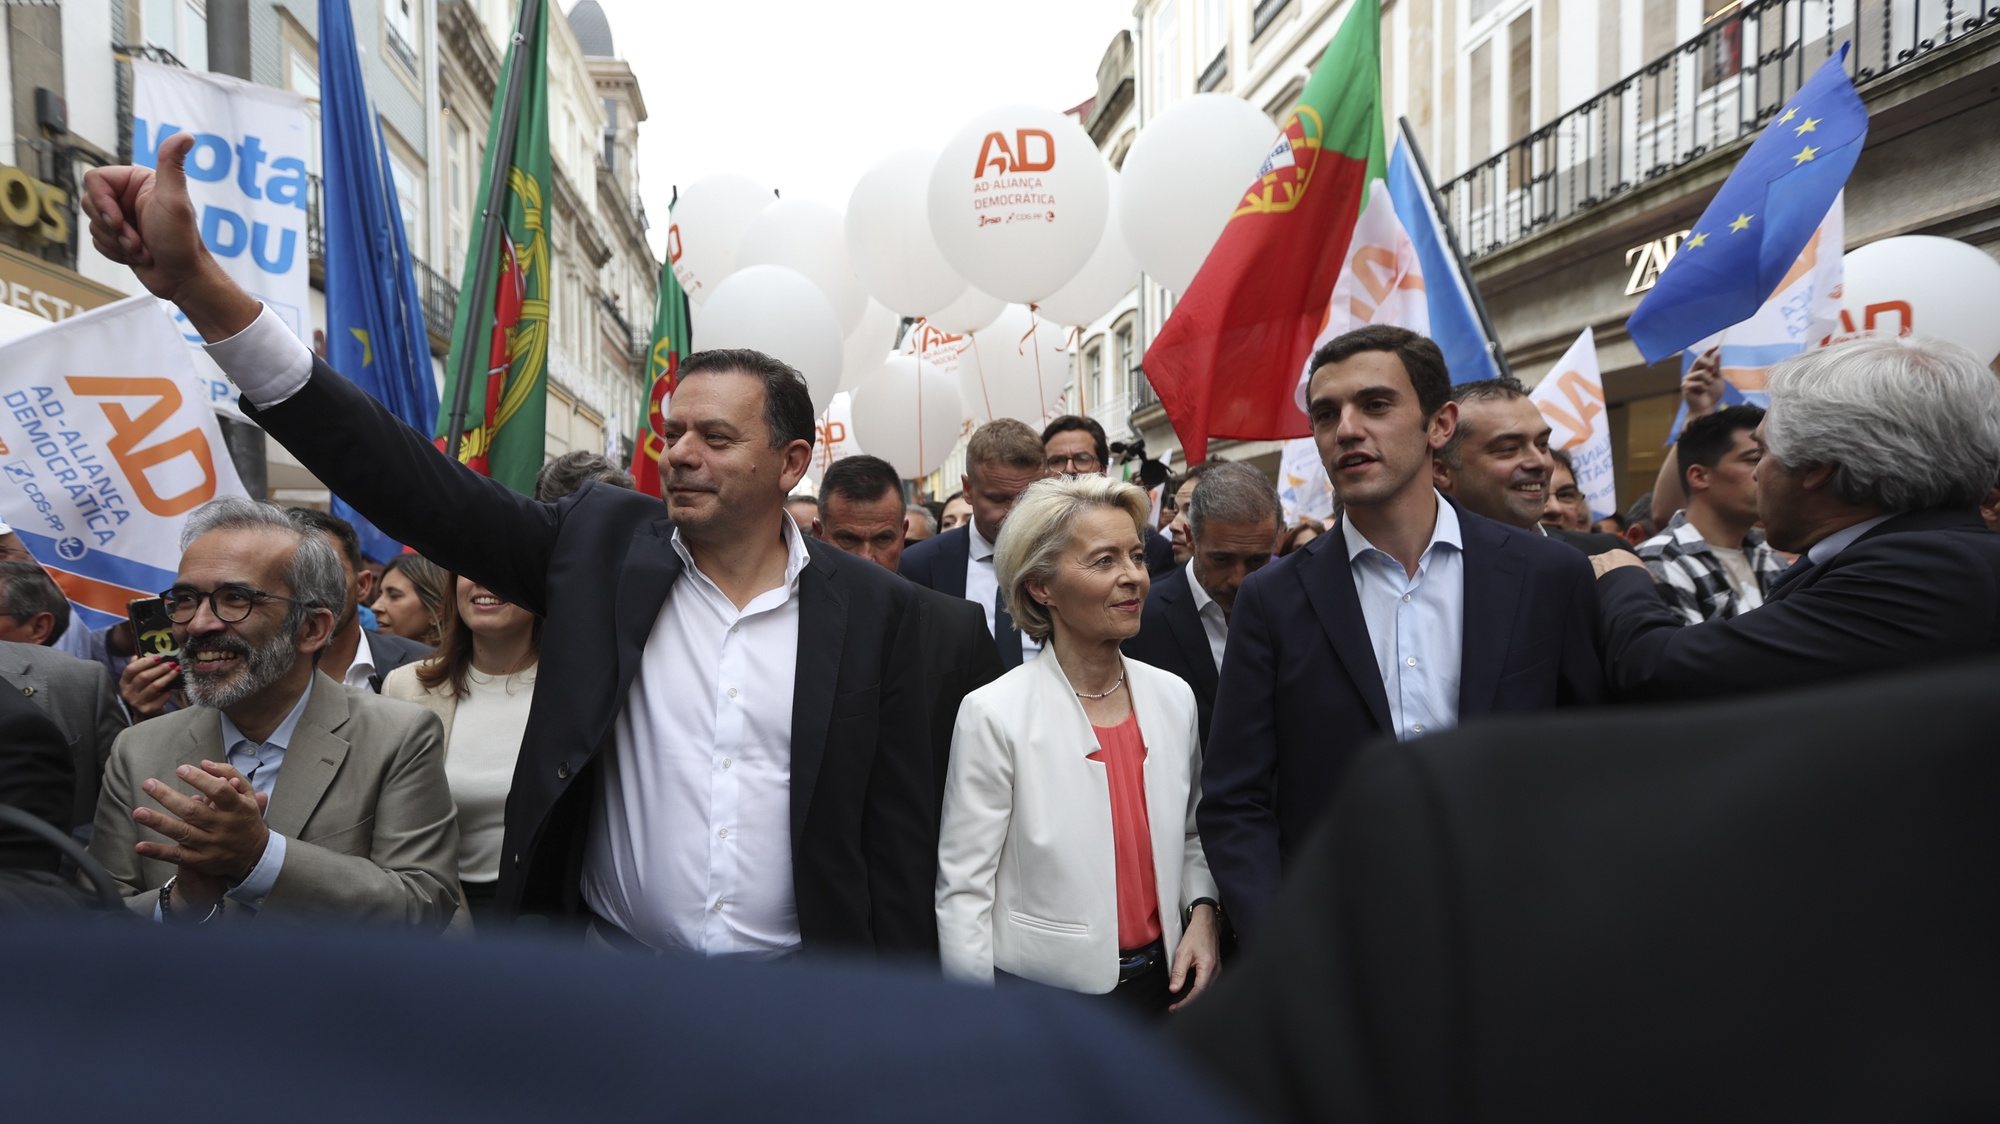 The head of the Democratic Alliance (AD) list for the European elections Sebastiao Bugalho (L), flanked by PSD (Social Democratic Party) leader, Luis Montenegro (2-L), by PSD`s member, Paulo Rangel (L), and by the EPP (European Popular Party) candidate for the presidency of the European Comission, Ursula von der Leyen (C), during a rally, as part of the campaign for the European elections, Porto, Portugal, on 6th June 2024. TIAGO PETINGA/LUSA